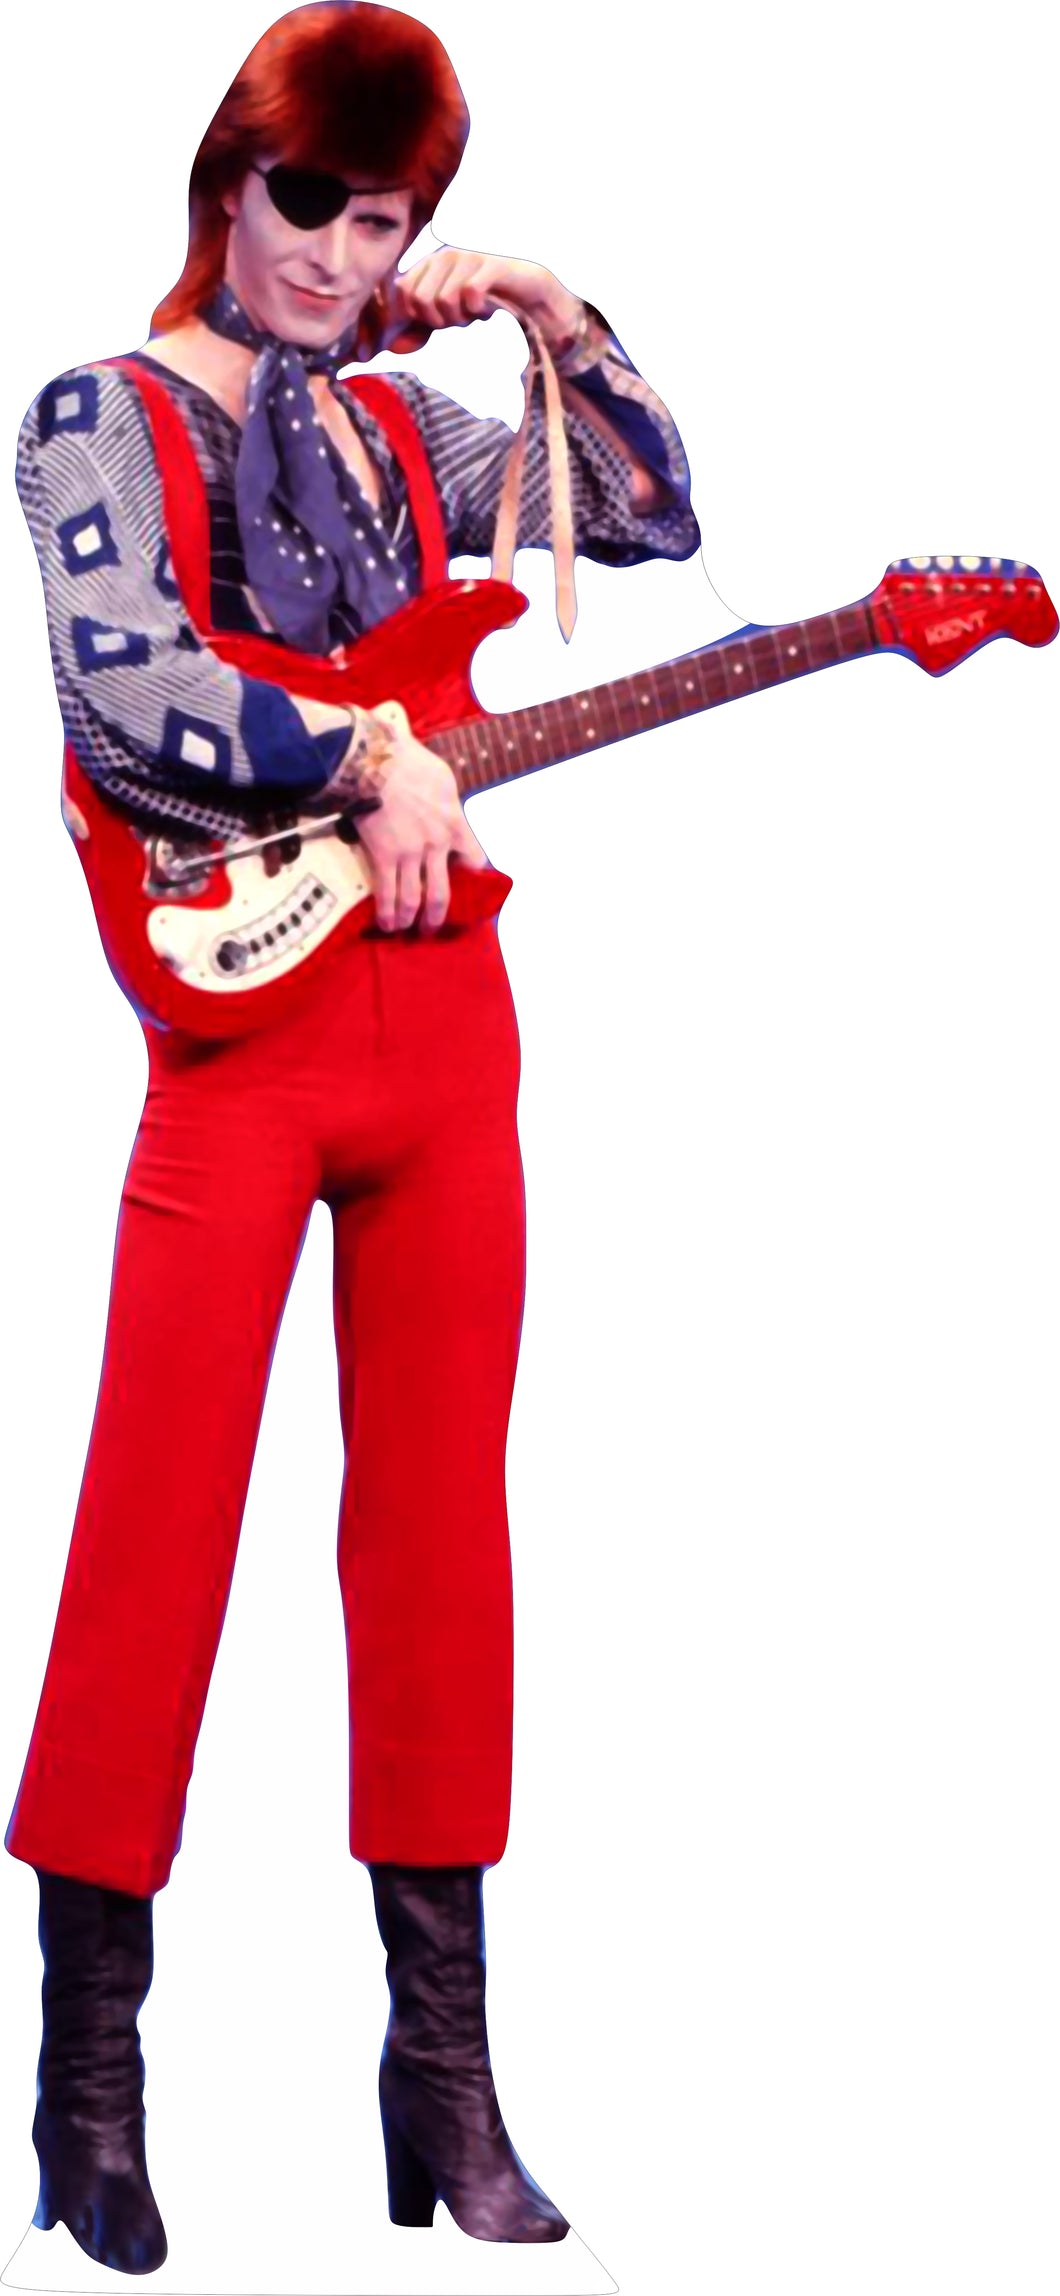 Copy of DAVID BOWIE in RED 75